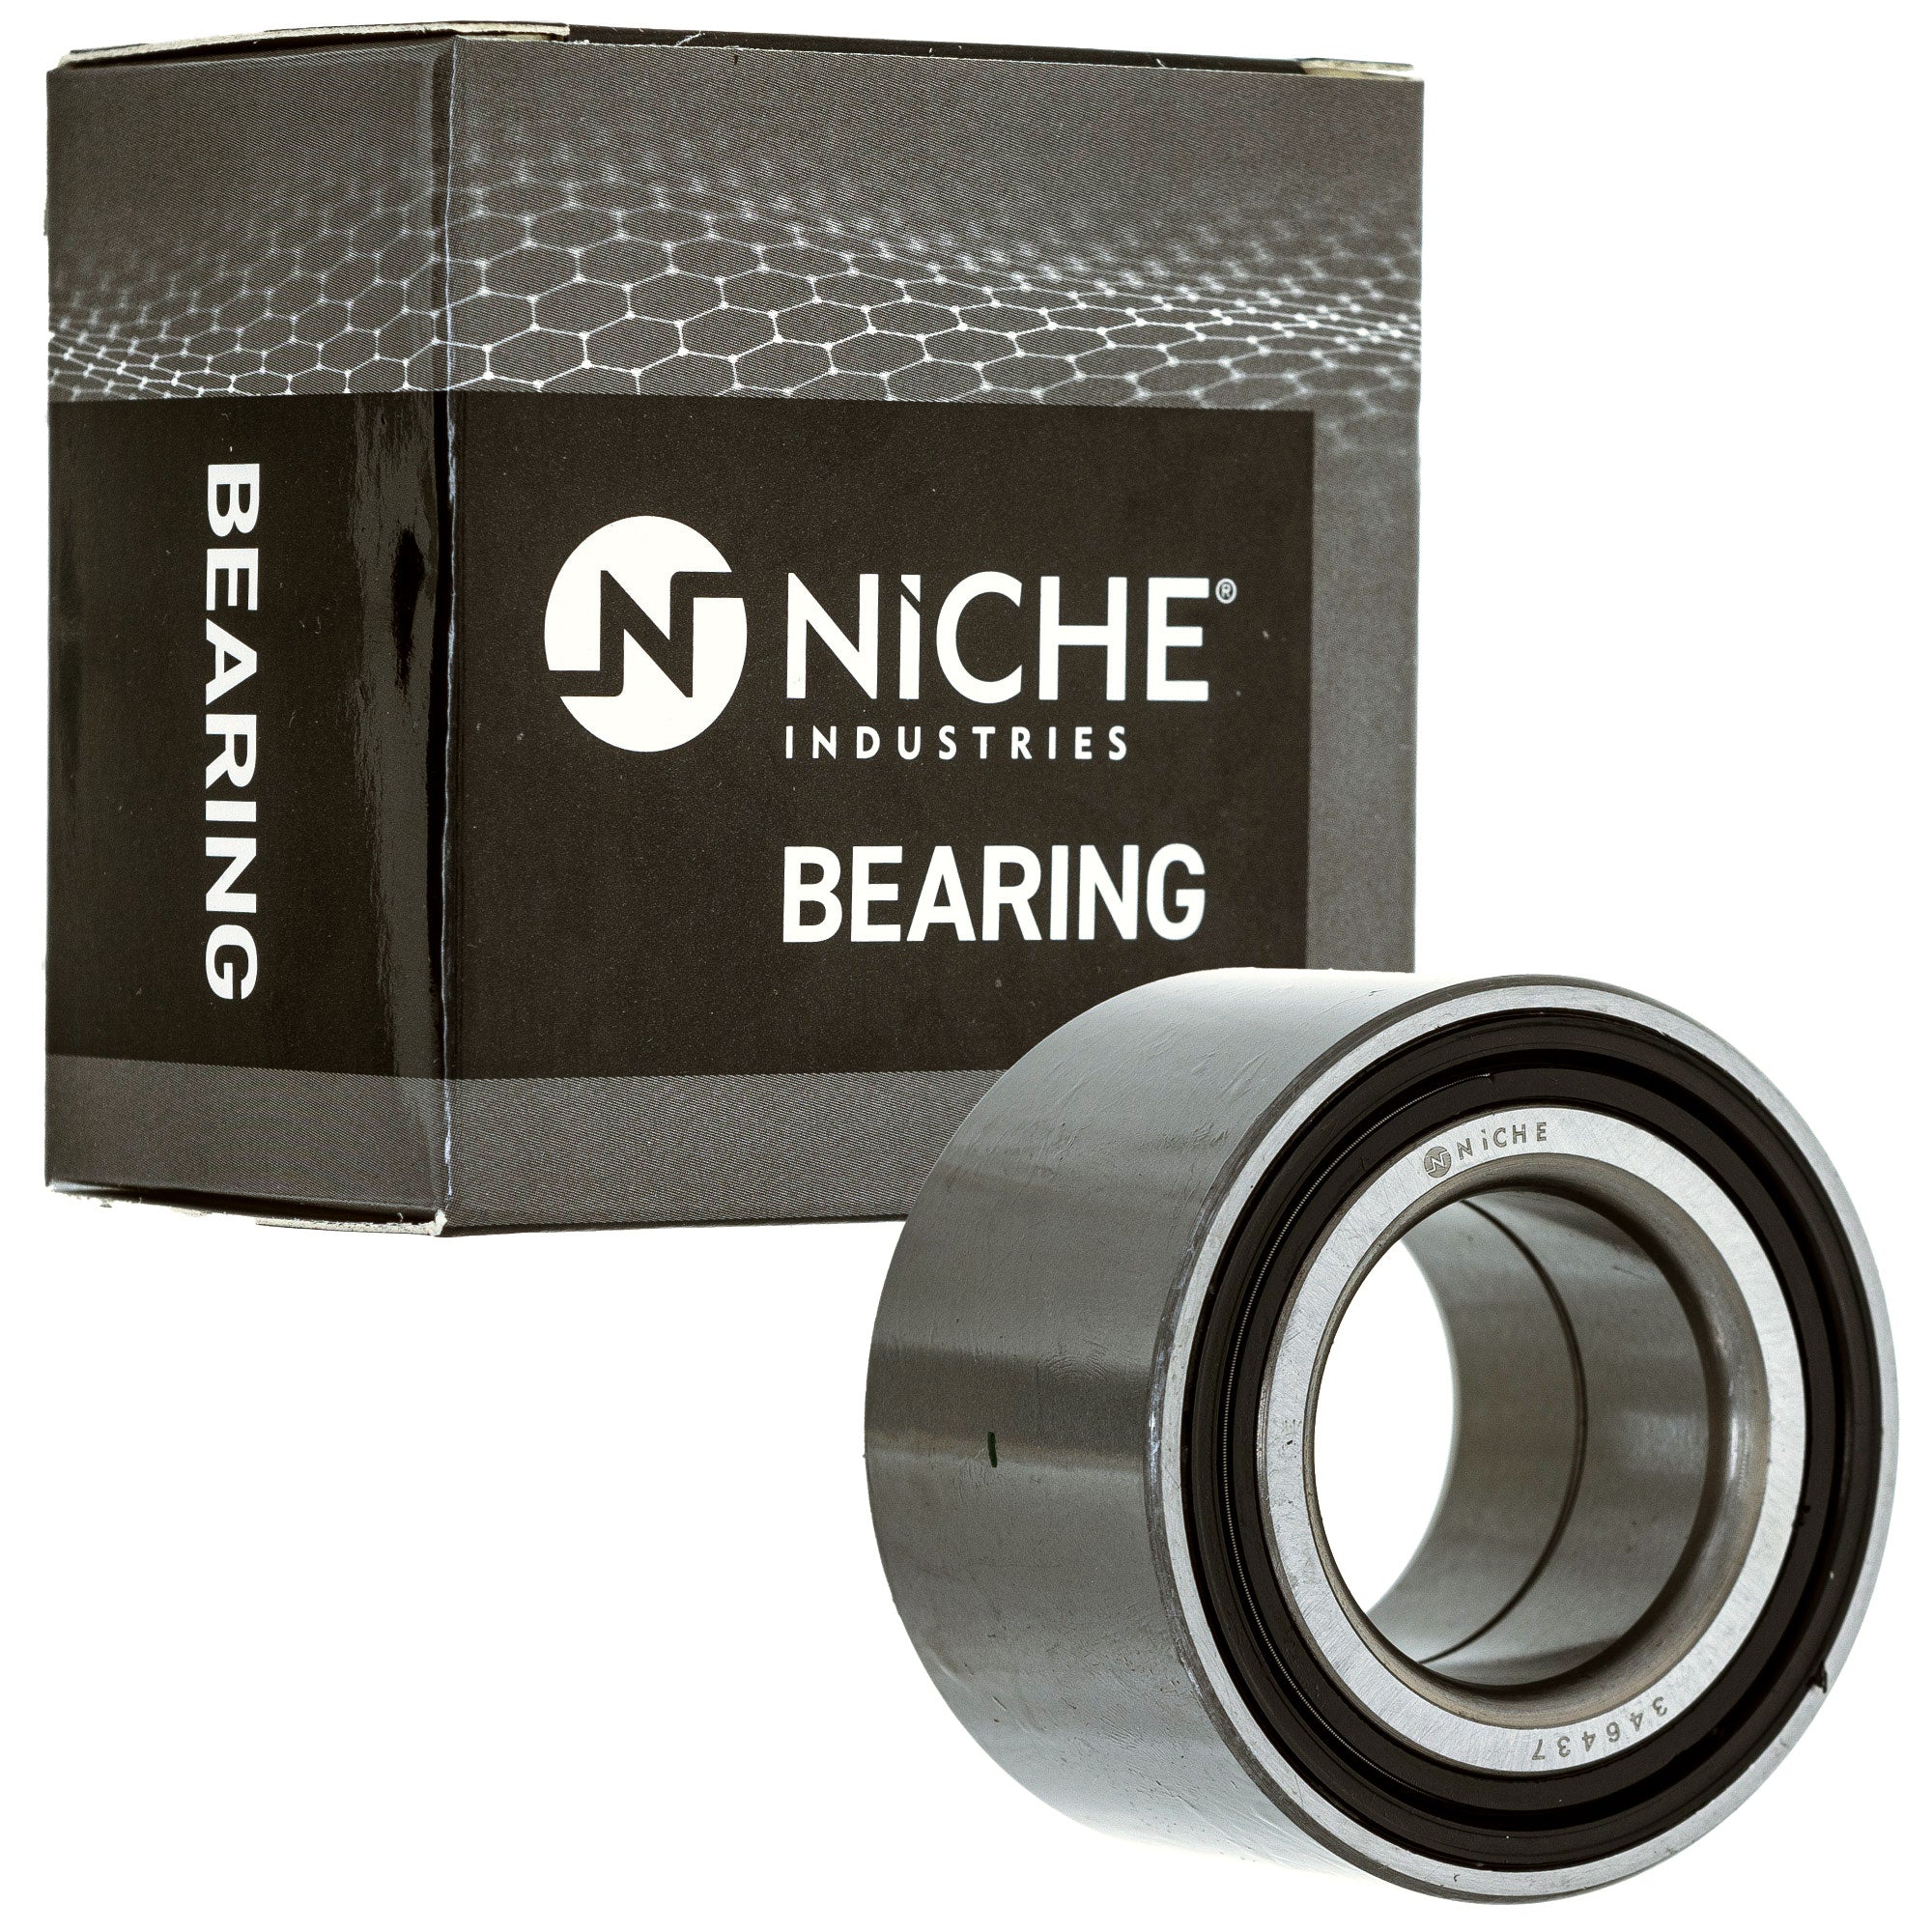 NICHE 519-CBB2200R Bearing 10-Pack for zOTHER Pioneer Big